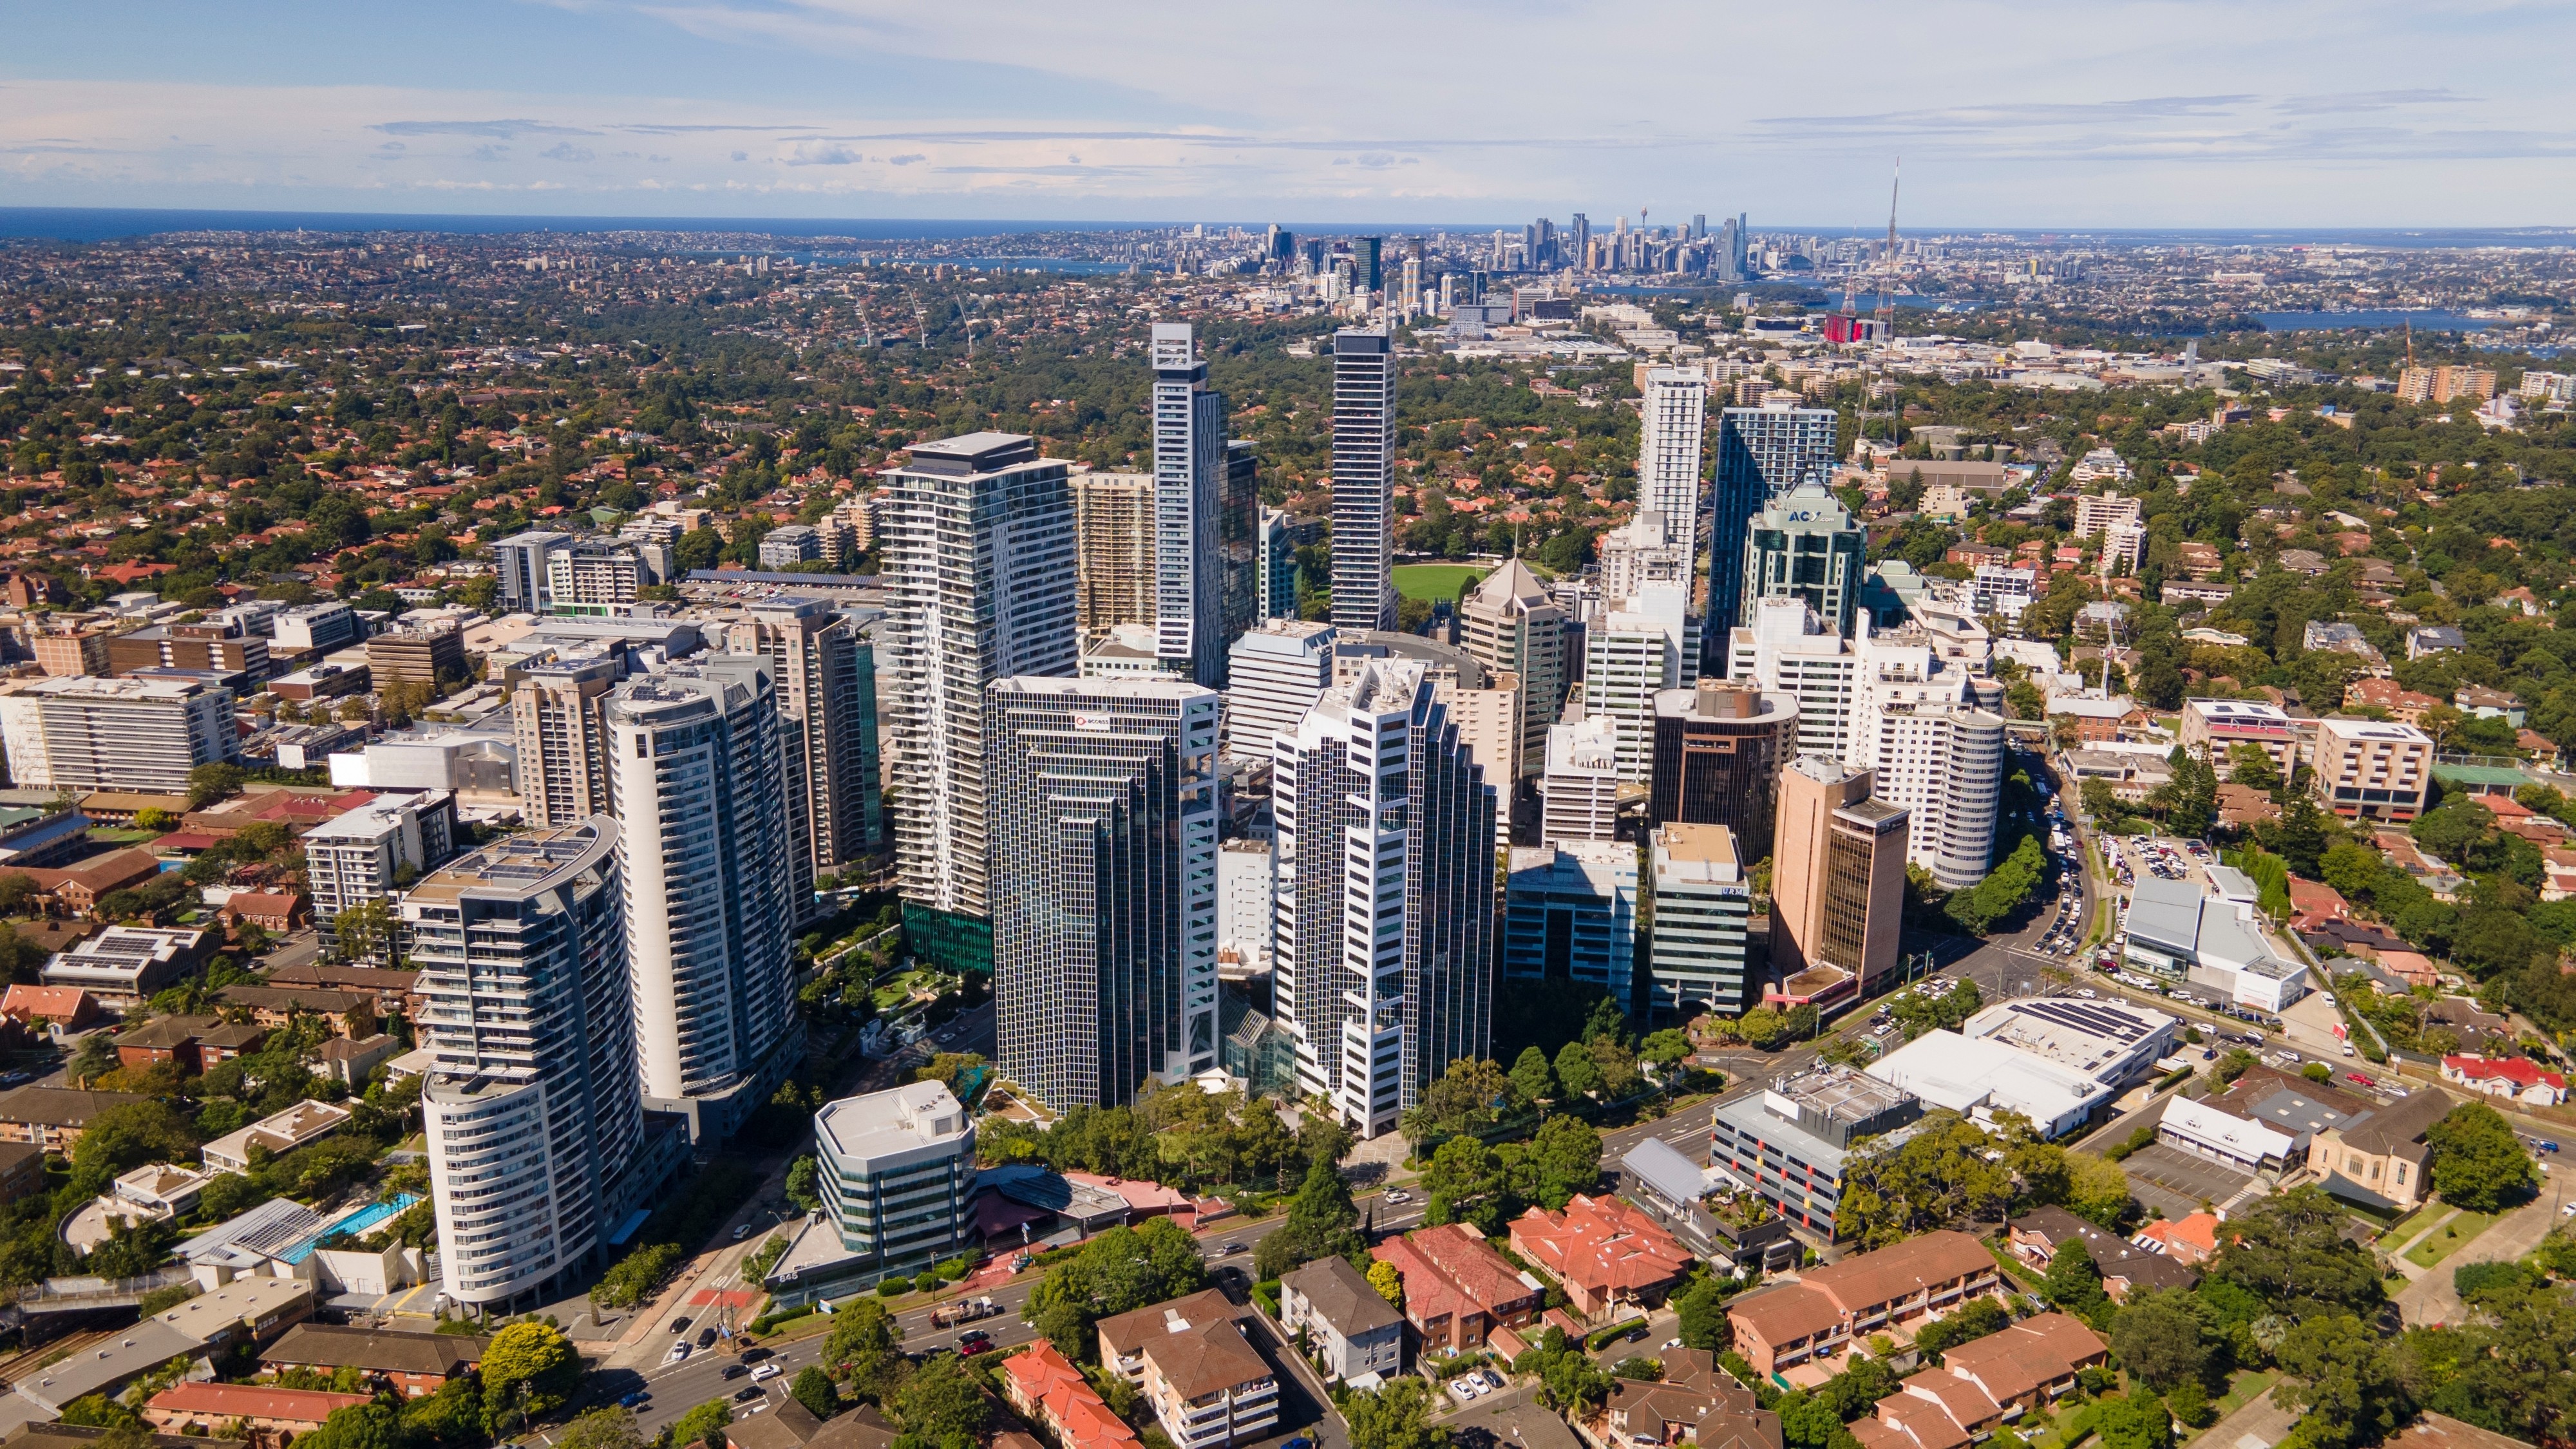 A drone’s eye view of the business district of Chatswood a north shore satellite city of Sydney, visible in the distance. Photo: Shutterstock